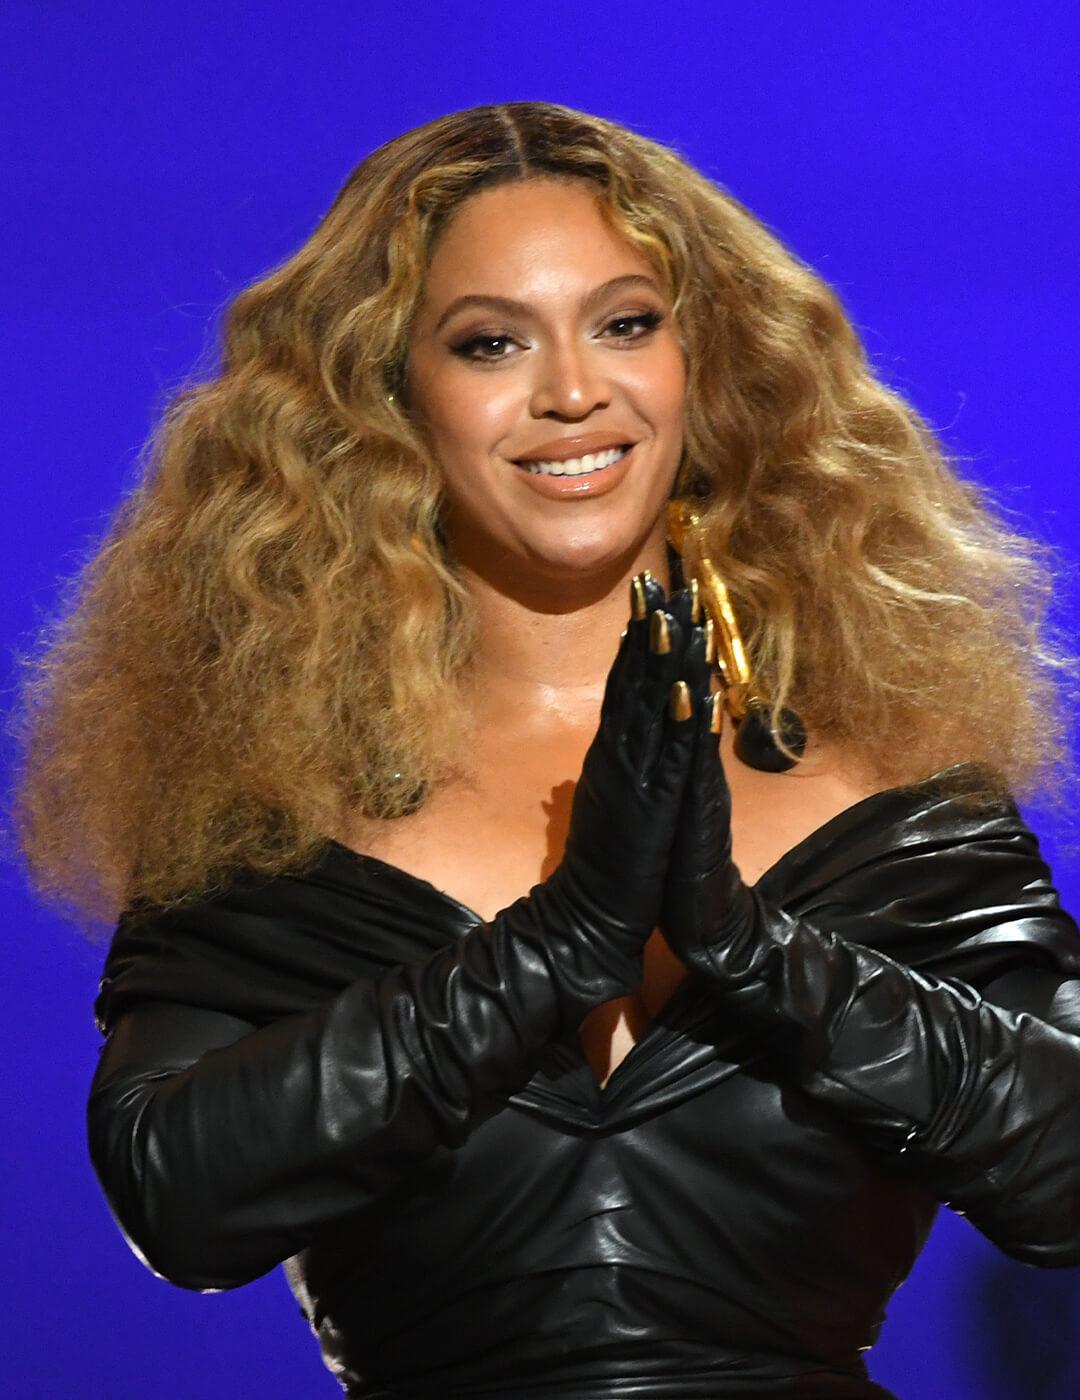 A photo of Beyoncé rocking the stage with her look